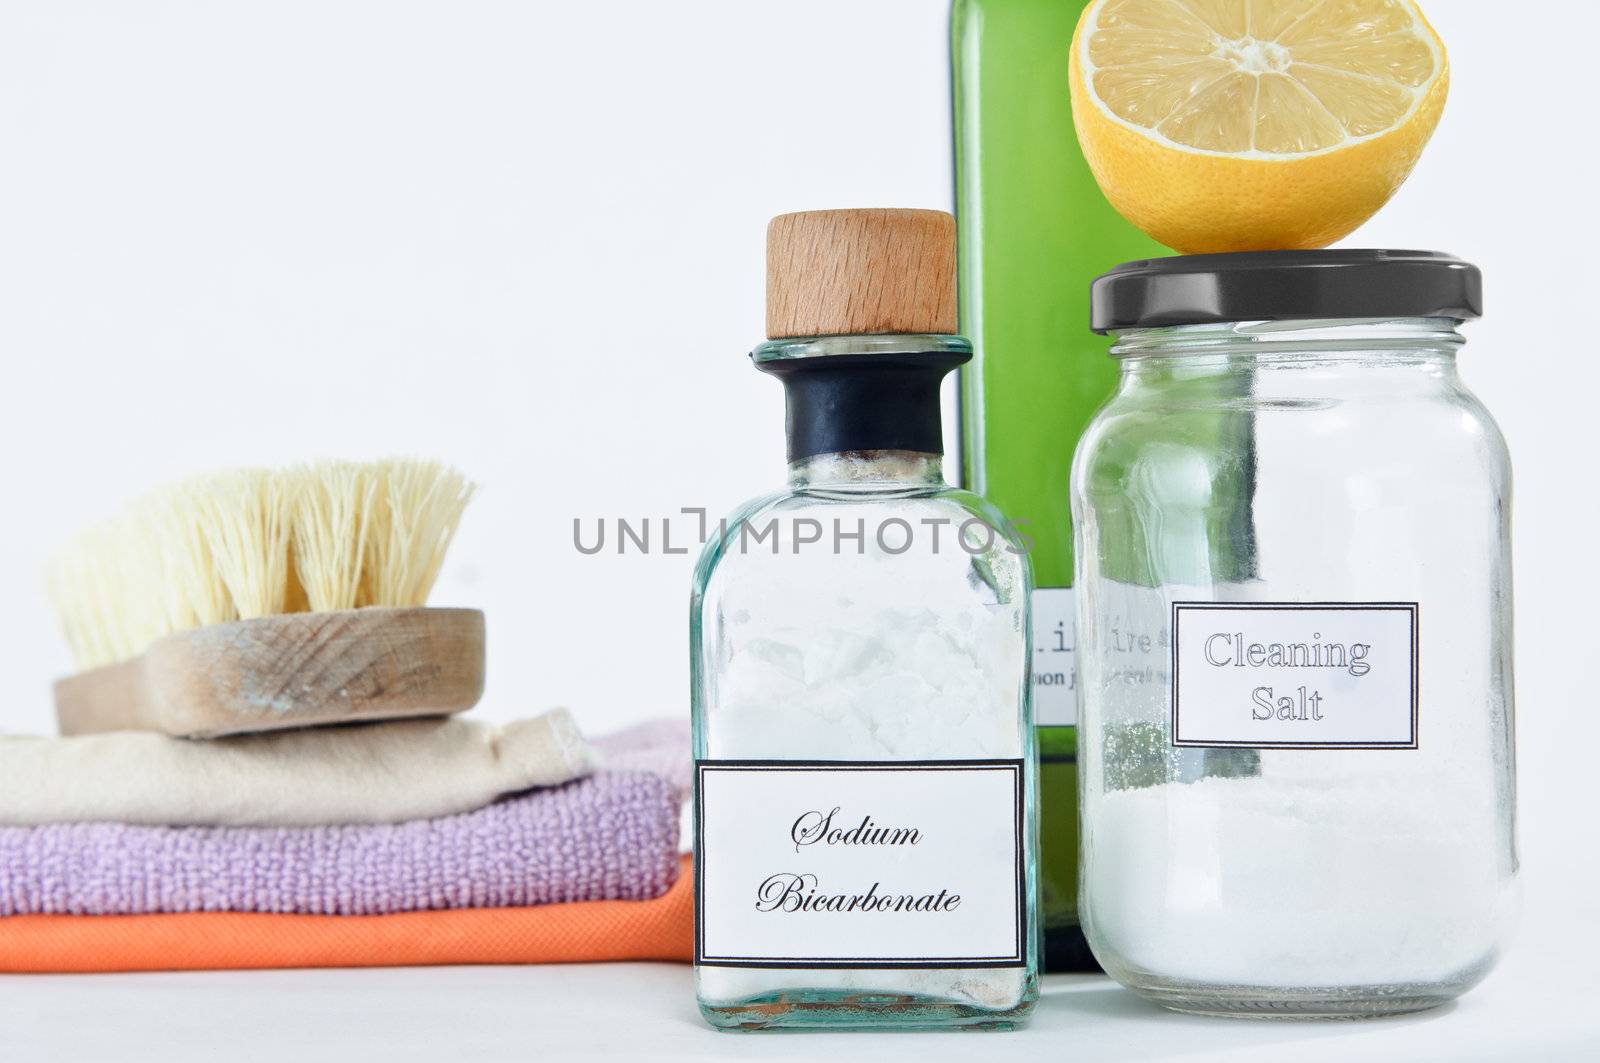 A range of non-toxic cleaning products in glass jars and bottles with a stack of cleaning cloths and scrubbing brush.  Copy space upper left.